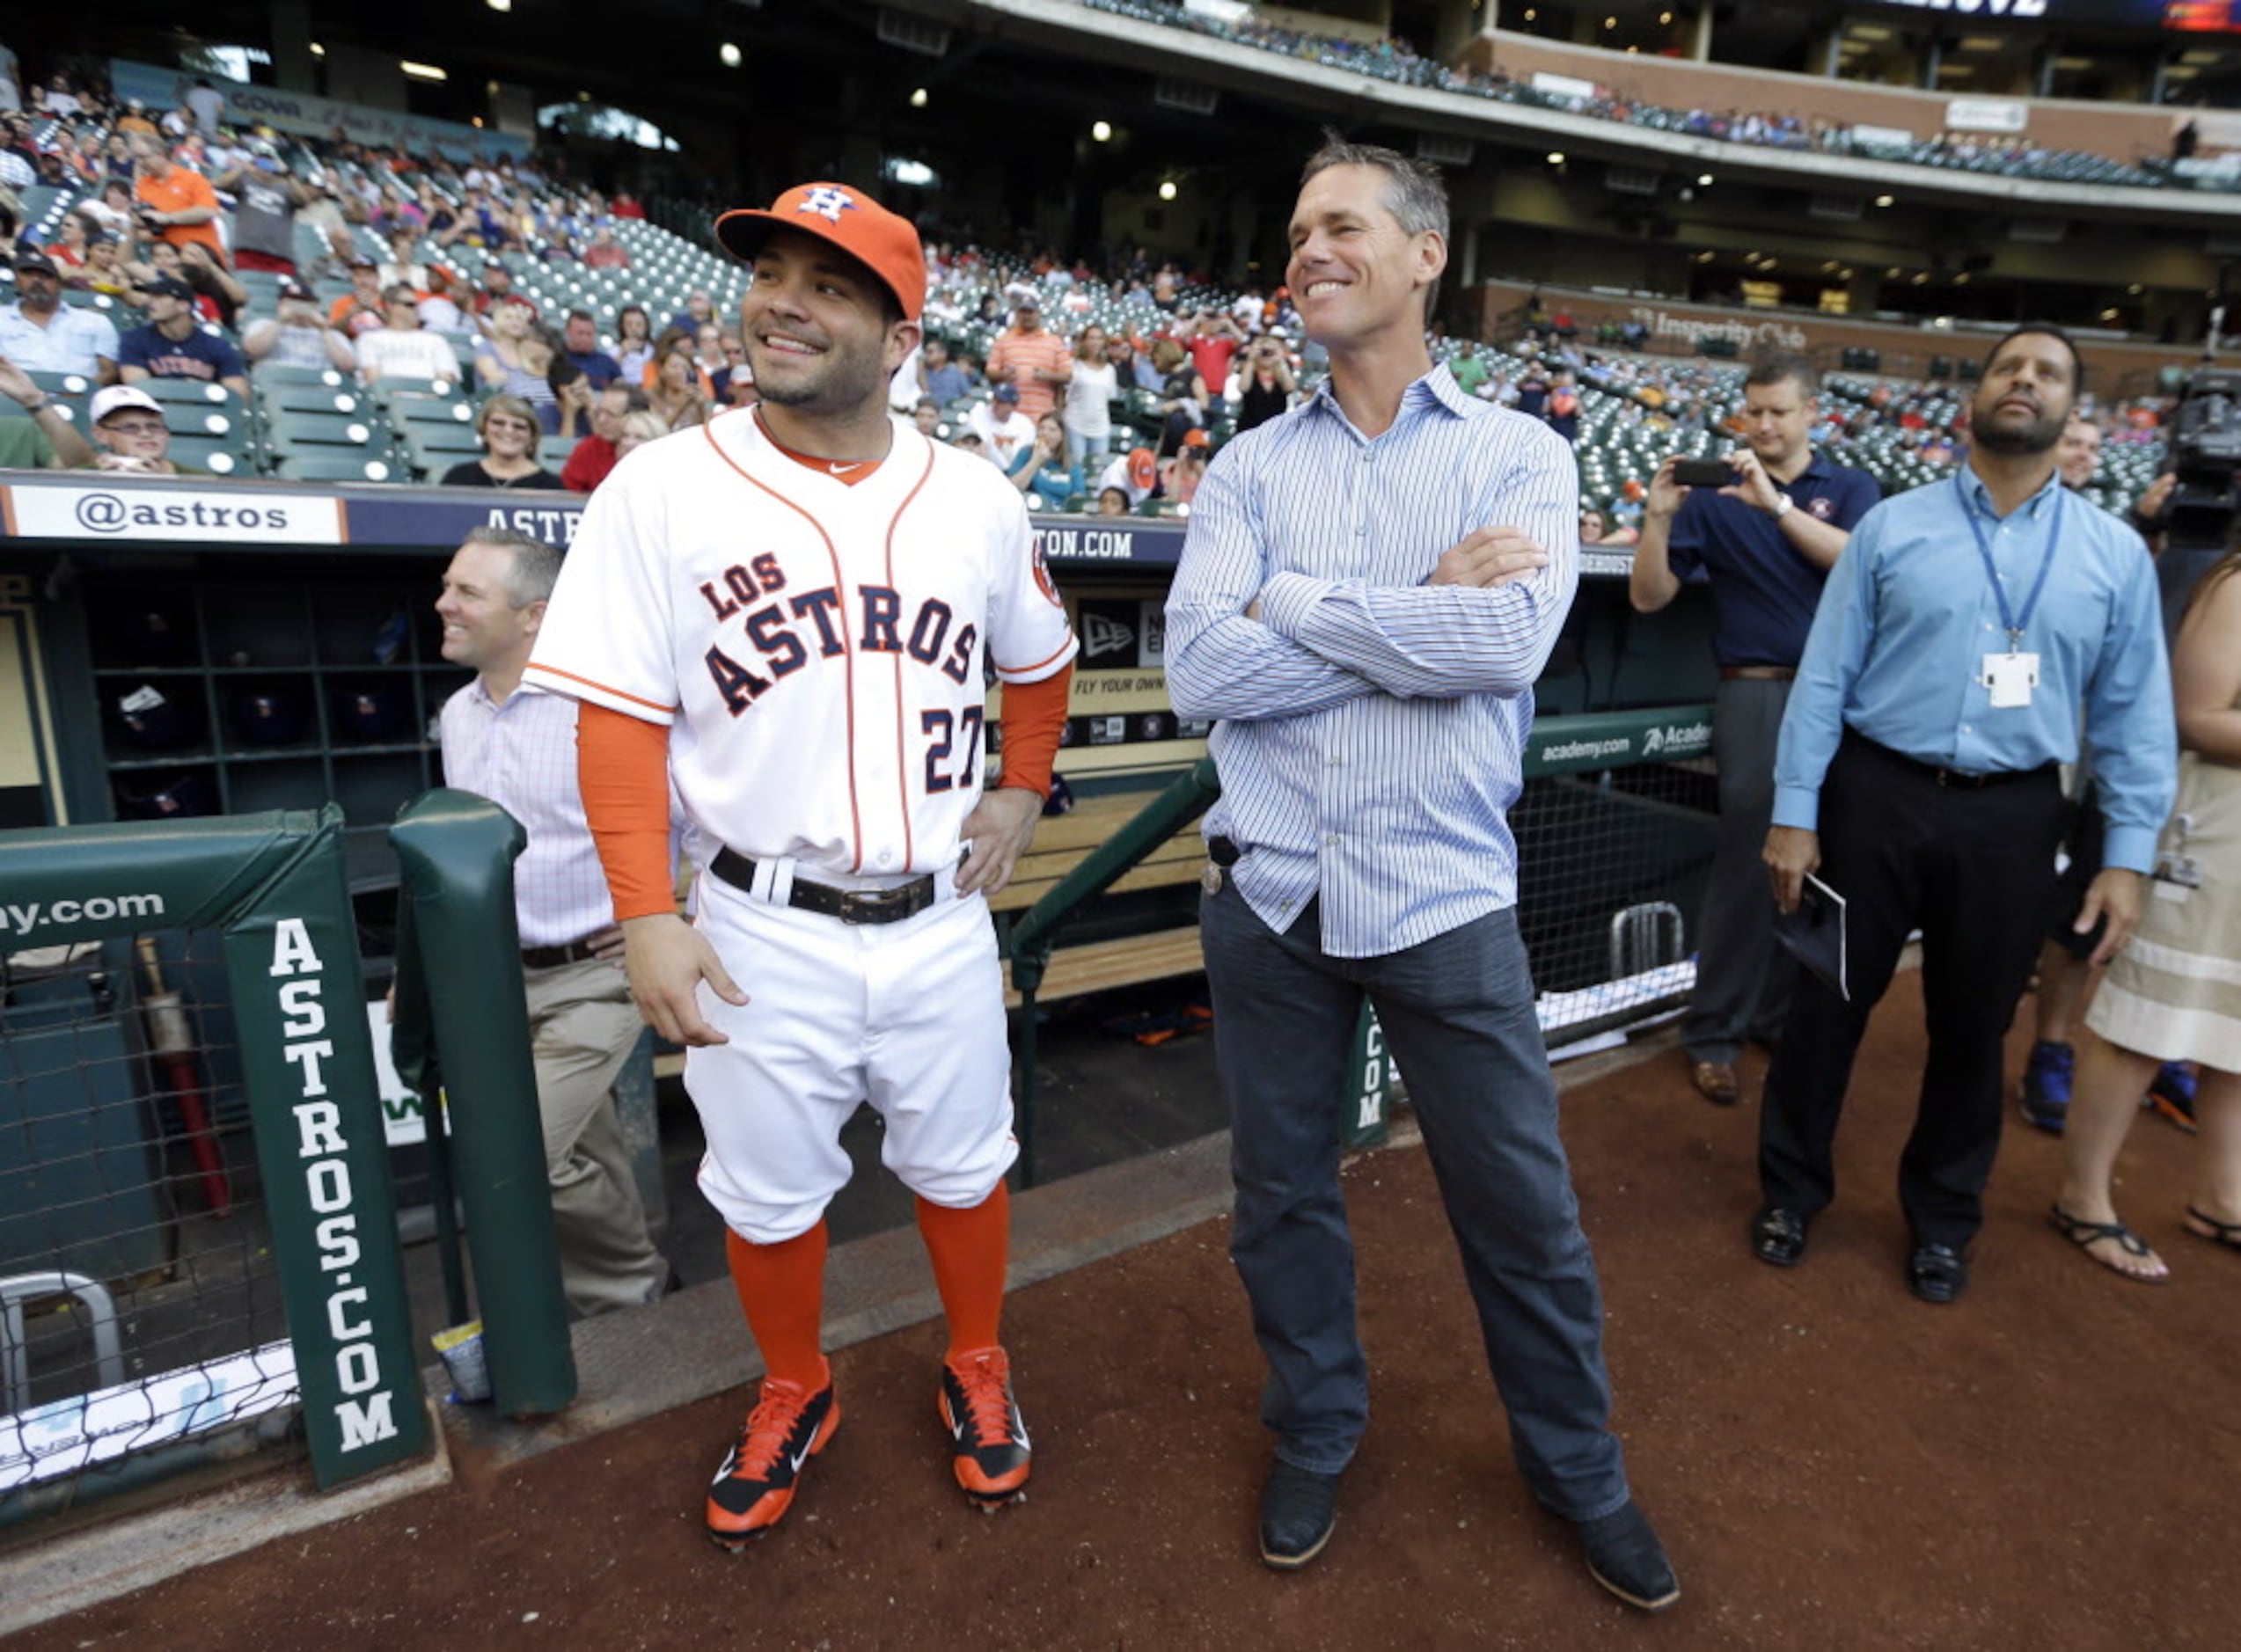 Biggio on being elected into Hall of Fame: Astros fans 'deserve' this moment